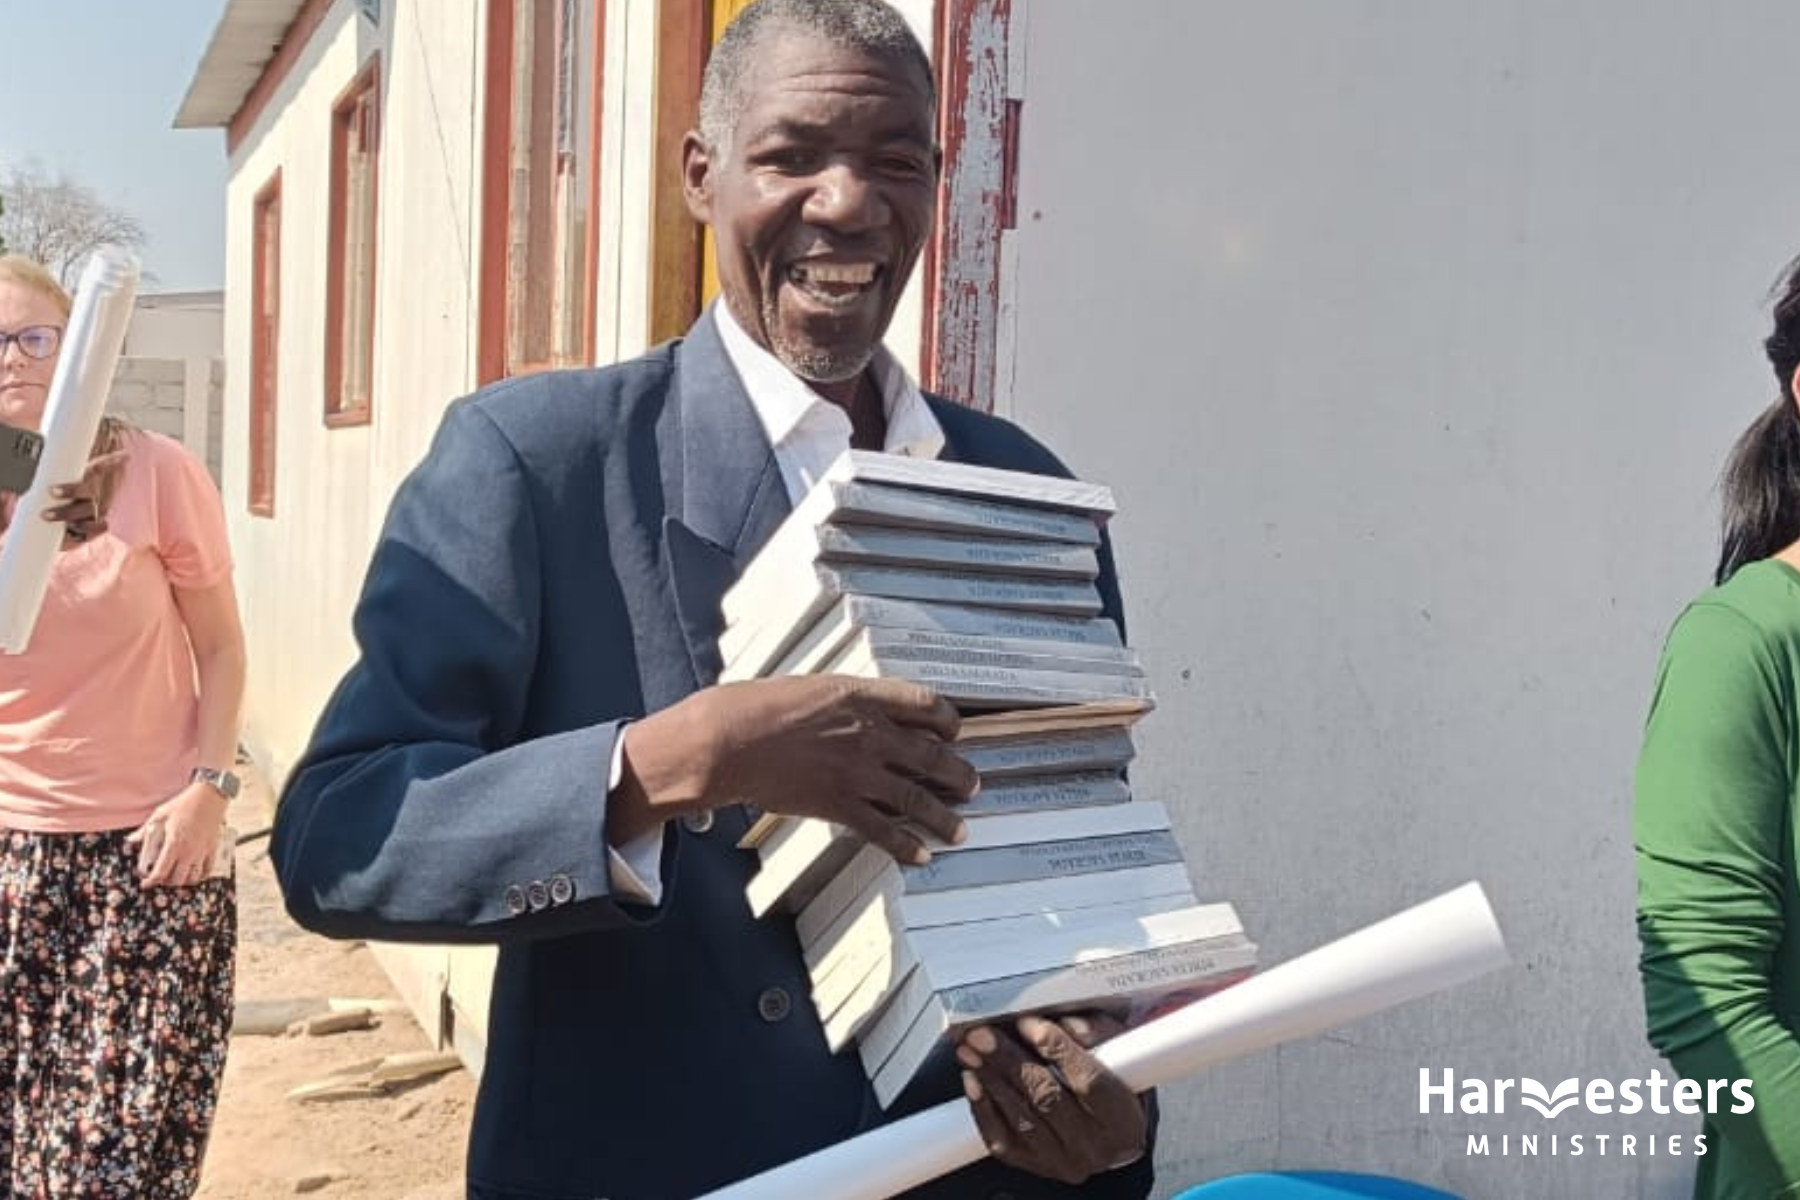 Man smiling with stack of Bibles